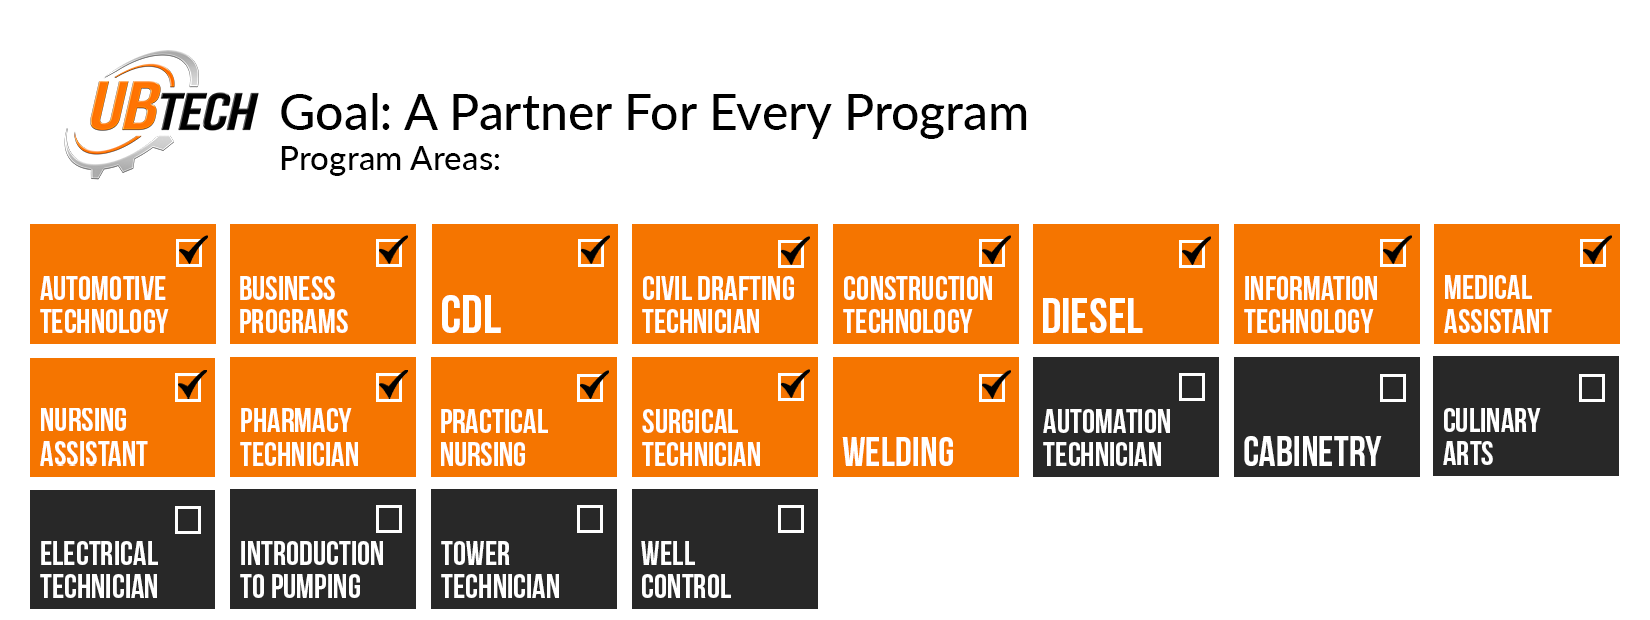 Goal: A Partner for every program. We currently have partners for: Automotive Technology, Business Programs, CDL, Civil Drafting Technician, Construction Technology, Diesel, Information Technology, Medical Assistant, Nursing Assistant, Pharmacy Technician, Practical Nursing, Surgical Technician, and Welding. We still need partners for: Automation Technician, Cabinetry, Culinary Arts, Electrical Technician, Introduction to Pumping,  and Well Control